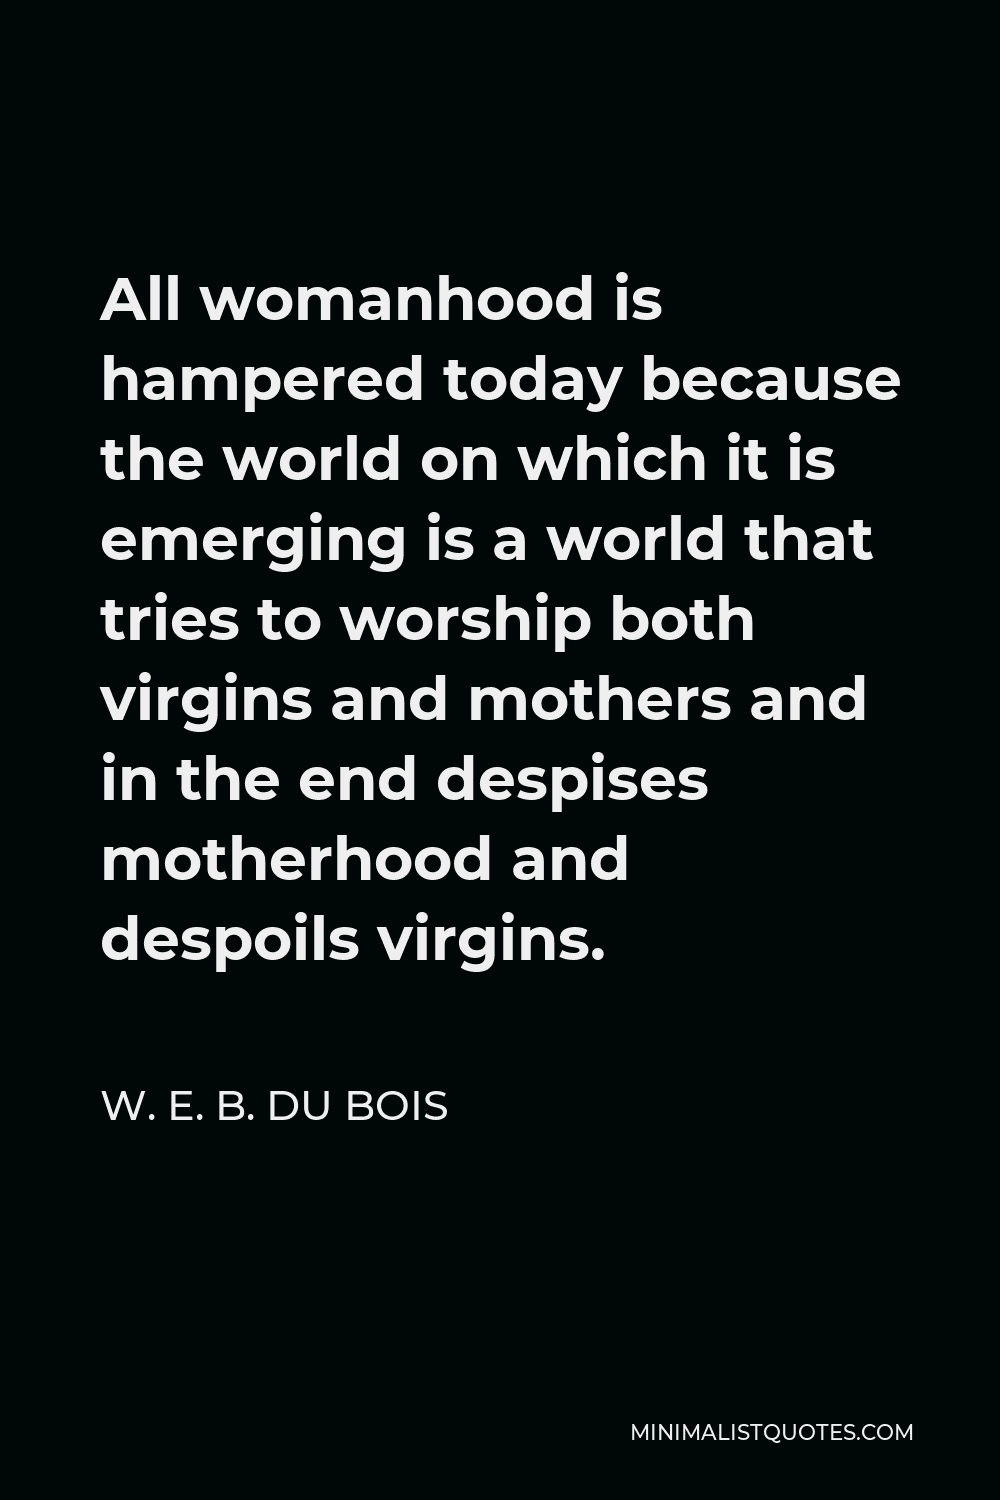 W. E. B. Du Bois Quote - All womanhood is hampered today because the world on which it is emerging is a world that tries to worship both virgins and mothers and in the end despises motherhood and despoils virgins.